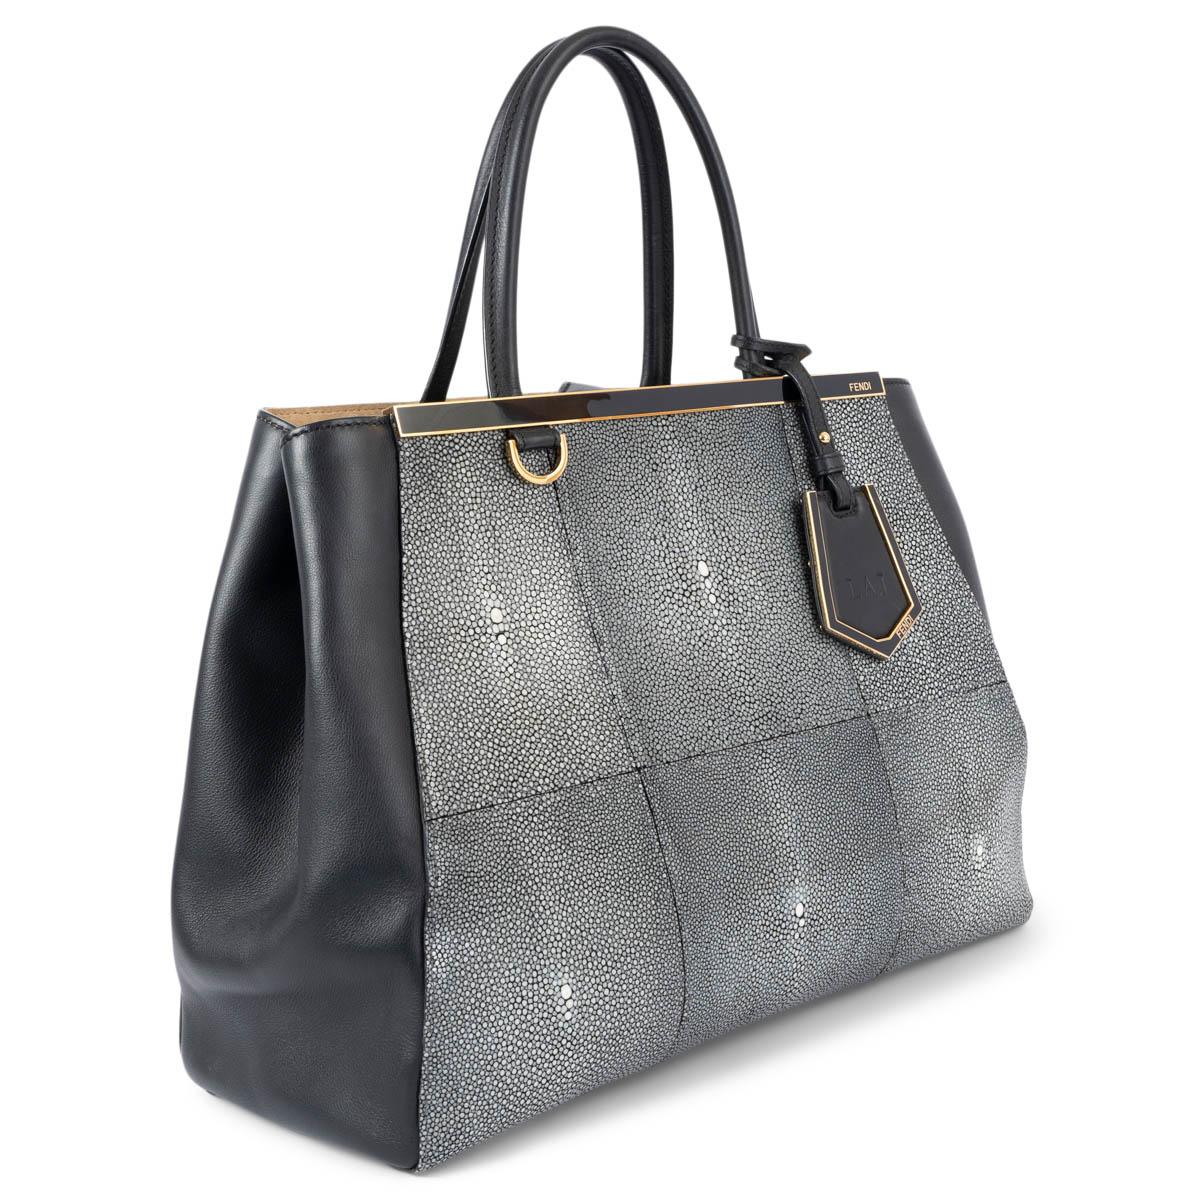 100% authentic Fendi Medium 2jours bag in grey and white stingray and smooth black leather. The design features gold-tone hardware and opens with a push-butoon to a beige suede and linen lined interior with one large zipped compartment in the middle